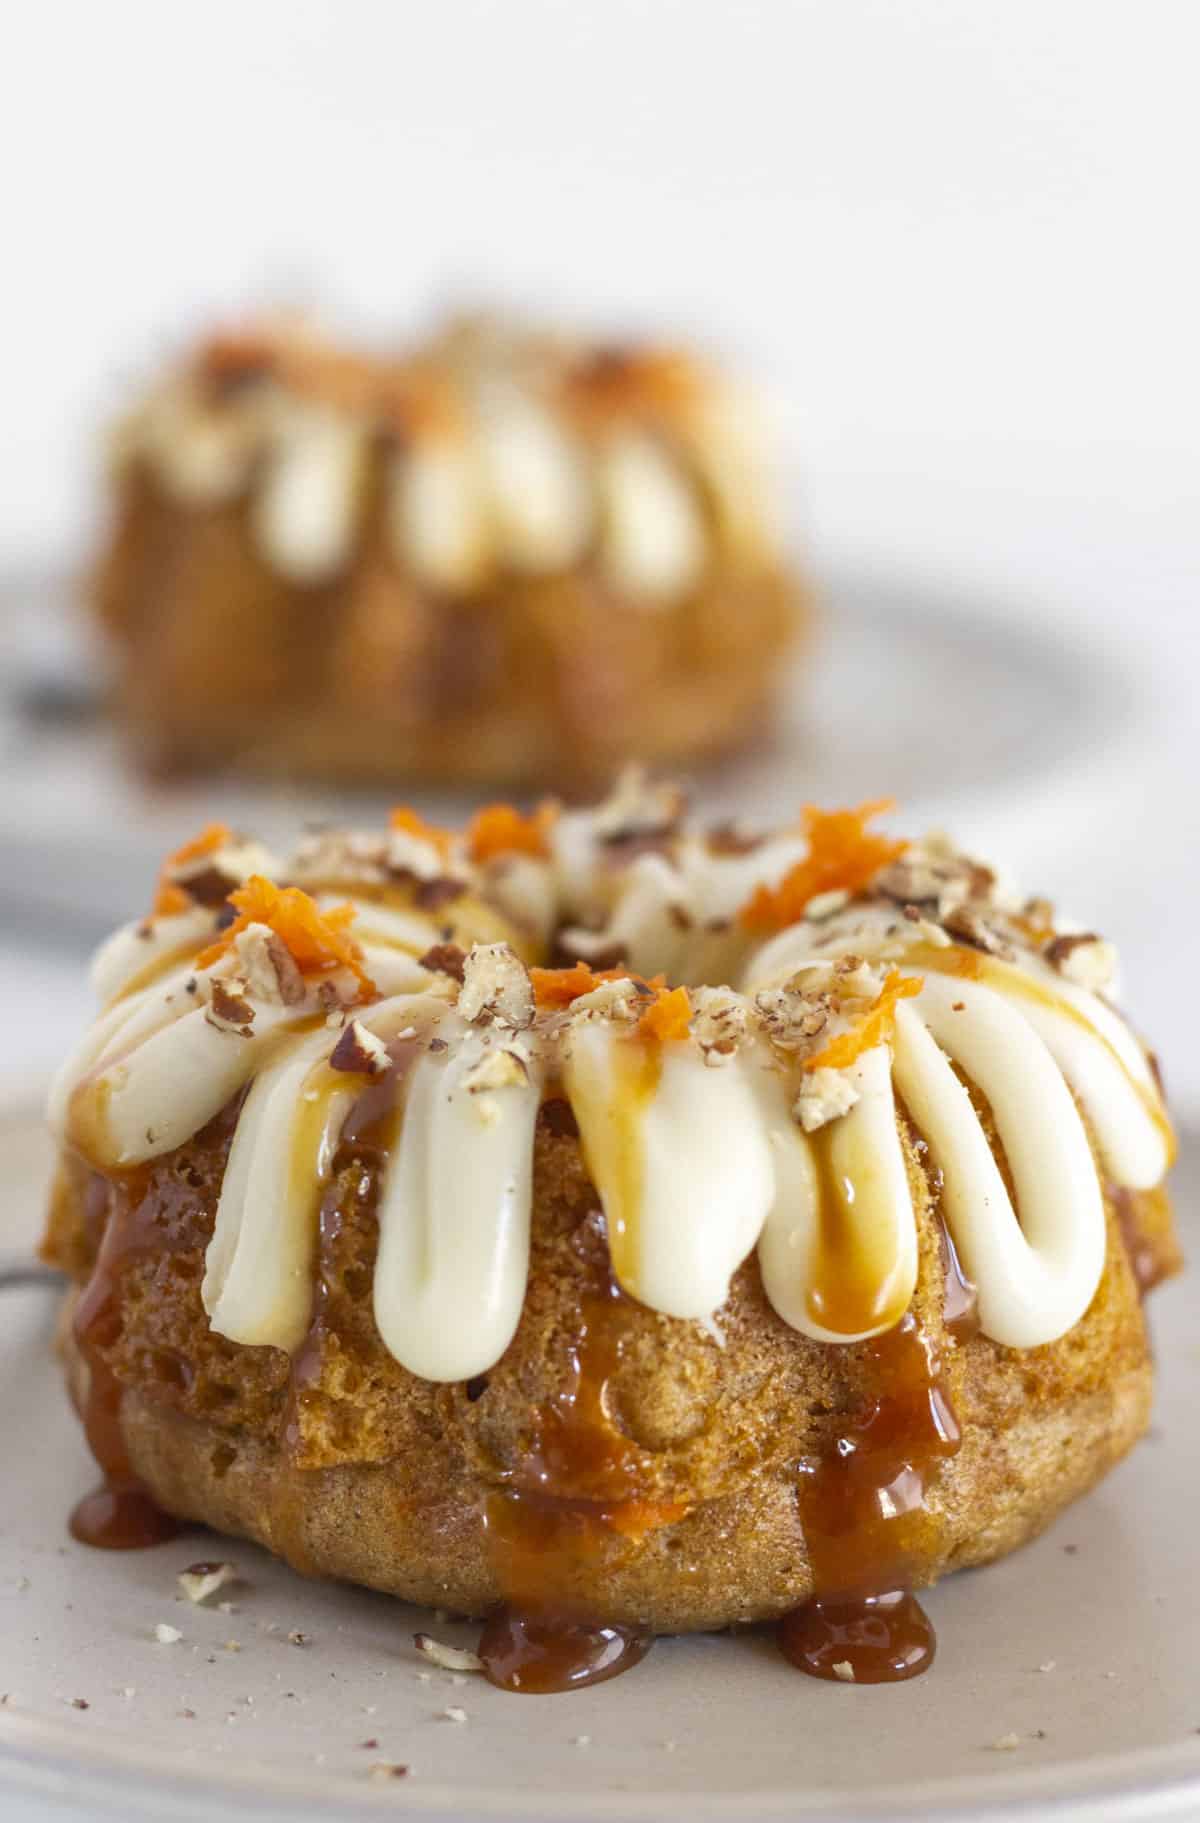 Two mini carrot bundt cakes on plates and ready to serve.